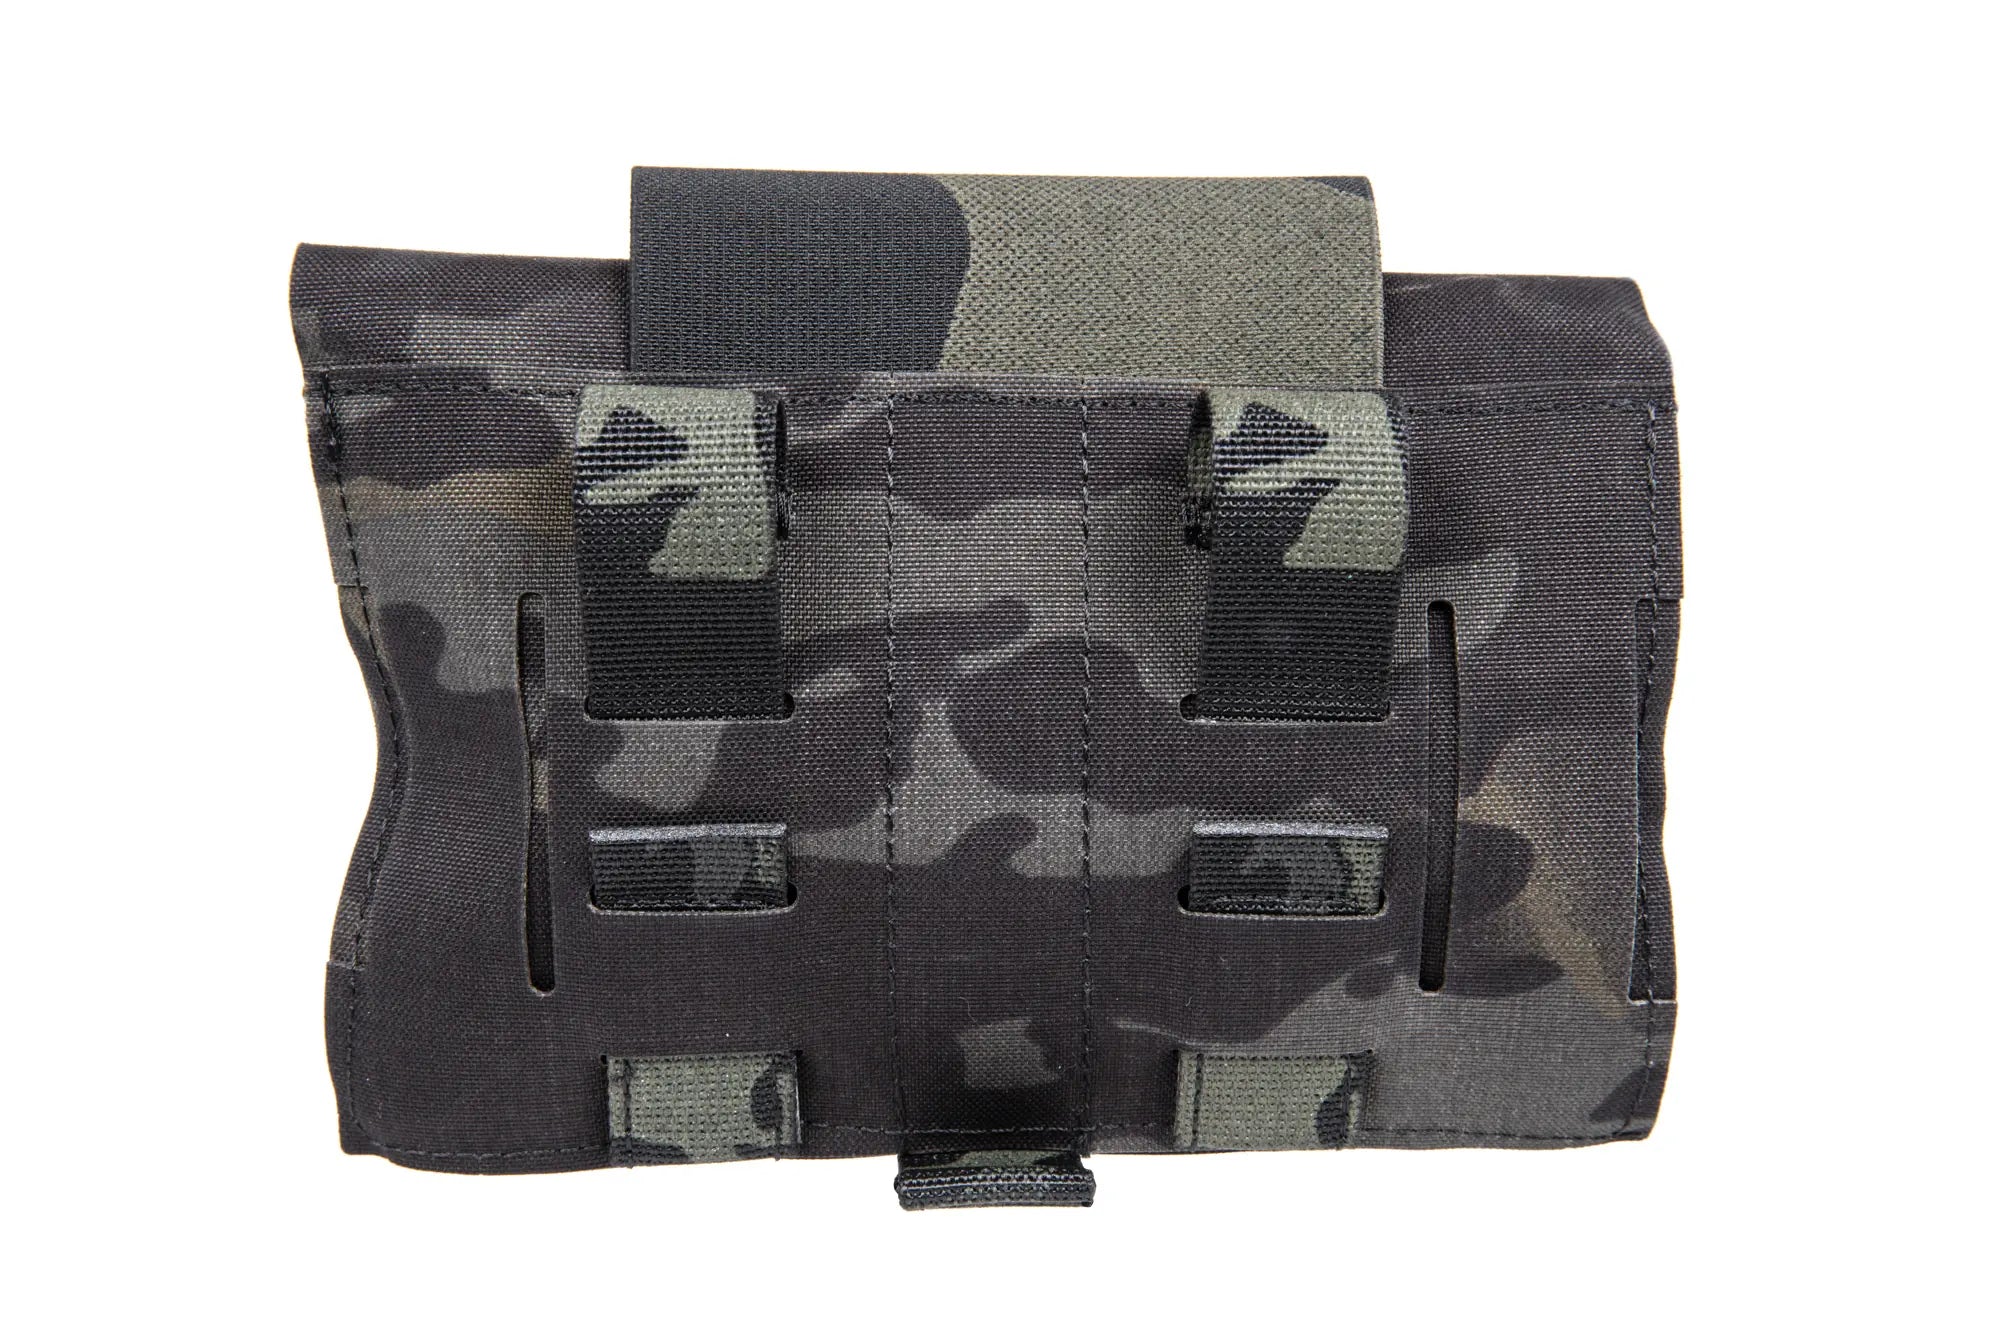 First aid kit with tourniquet sleeve Wosport MultiCam Black